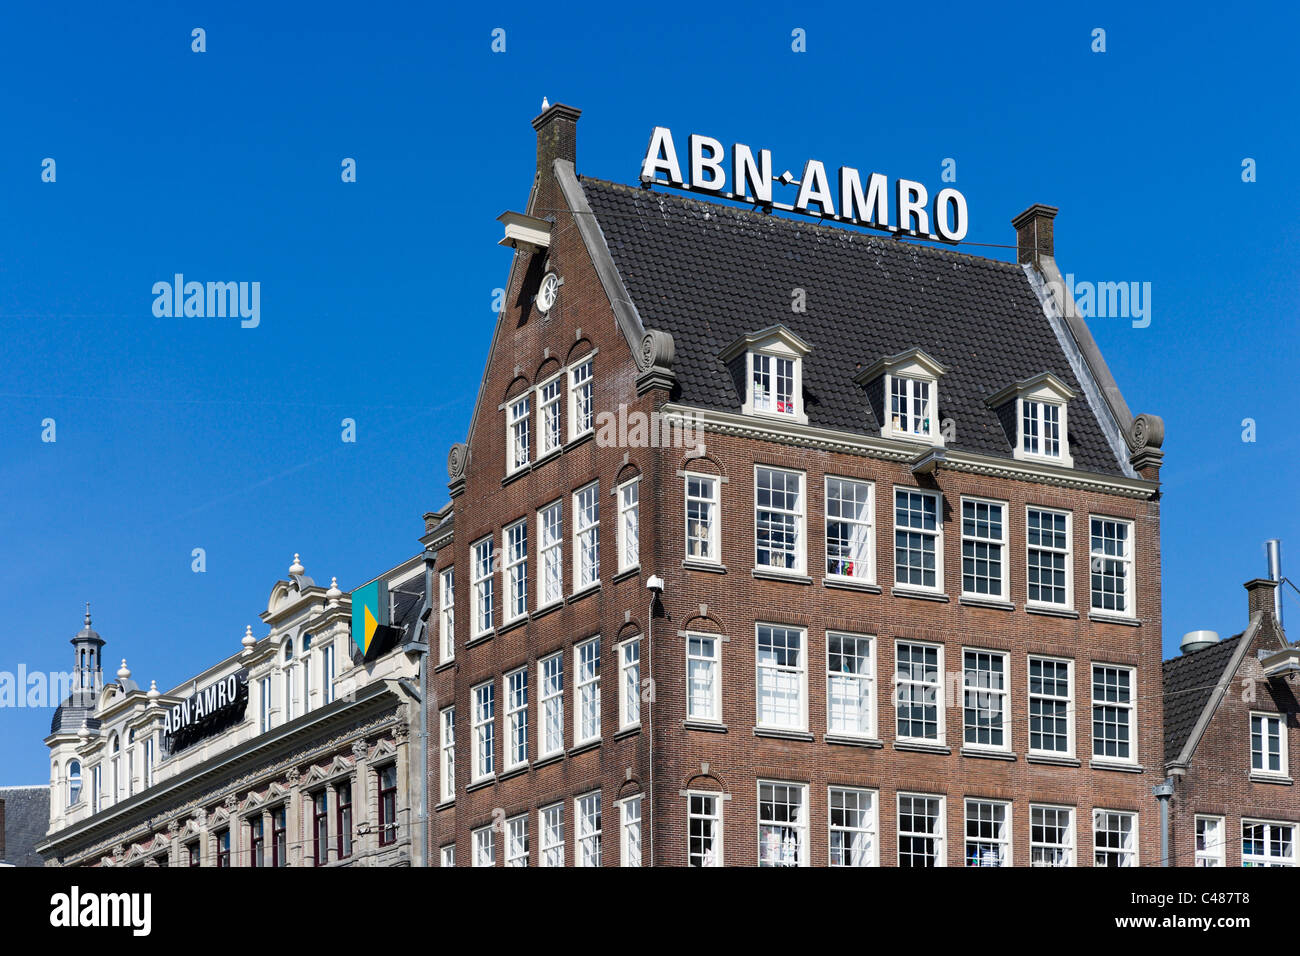 ABN Amro Bank, Dam Square, Amsterdam, Pays-Bas Banque D'Images